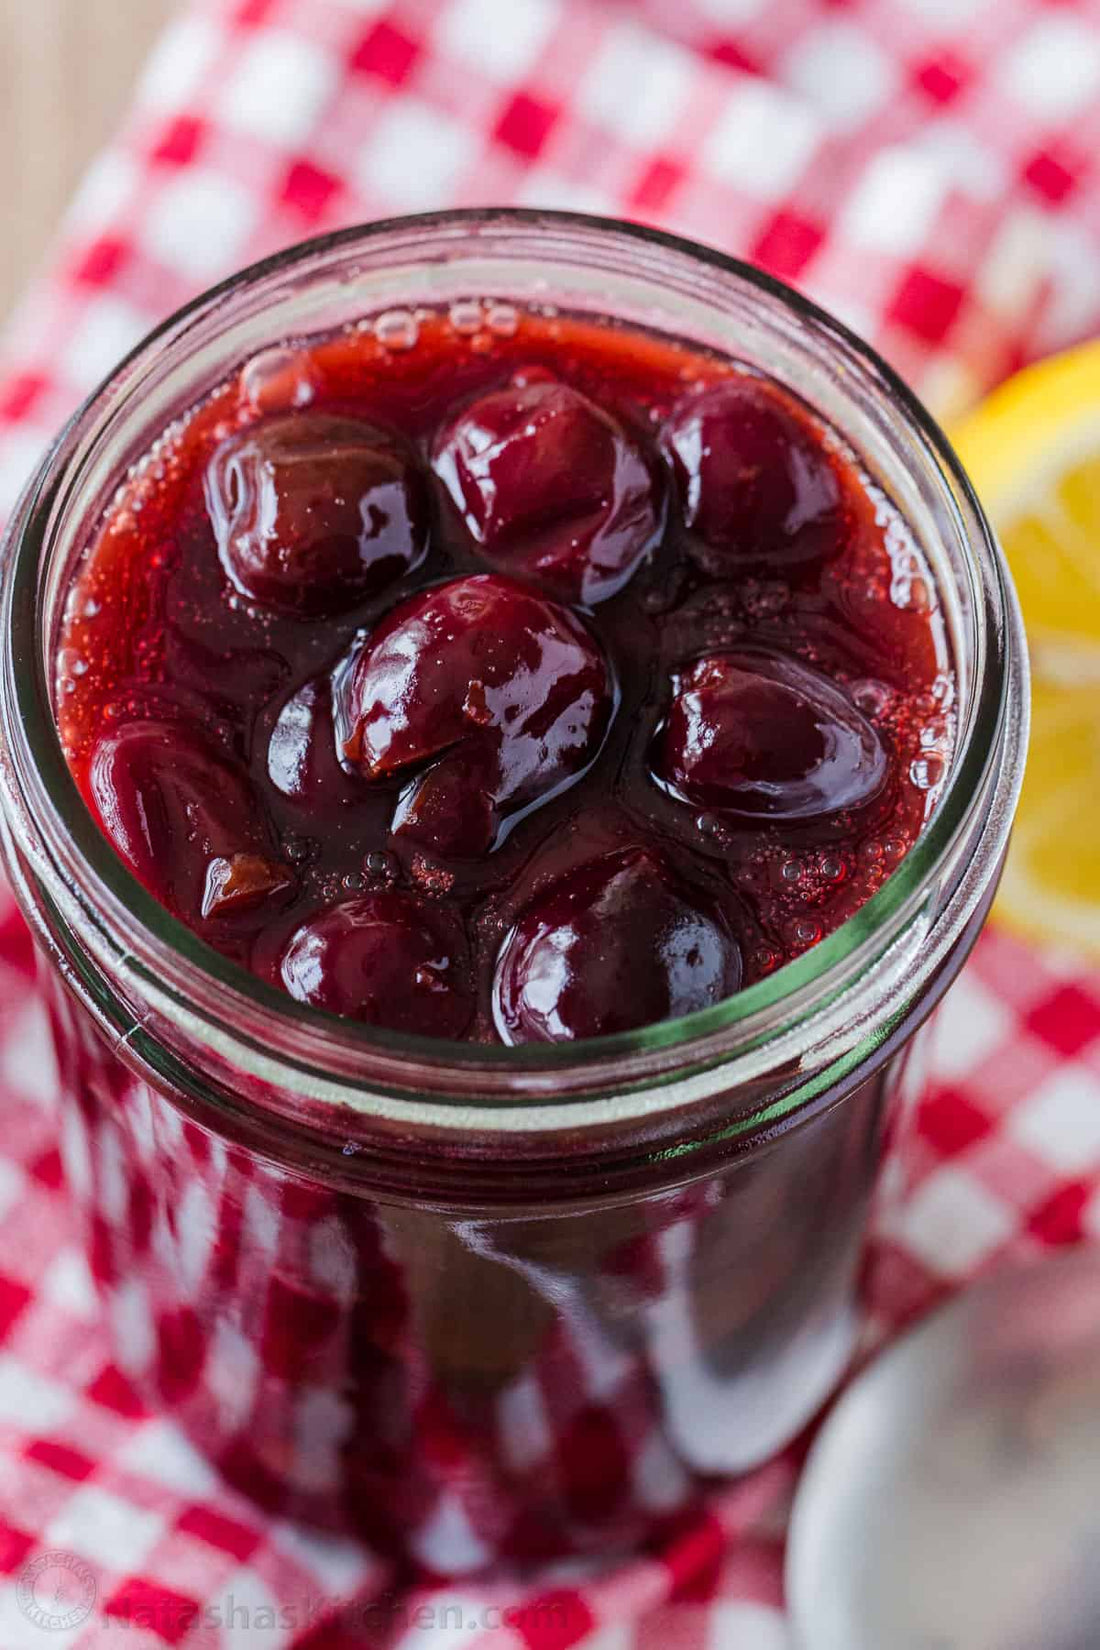 Lemon, Olive and Dried Cherry Sauce